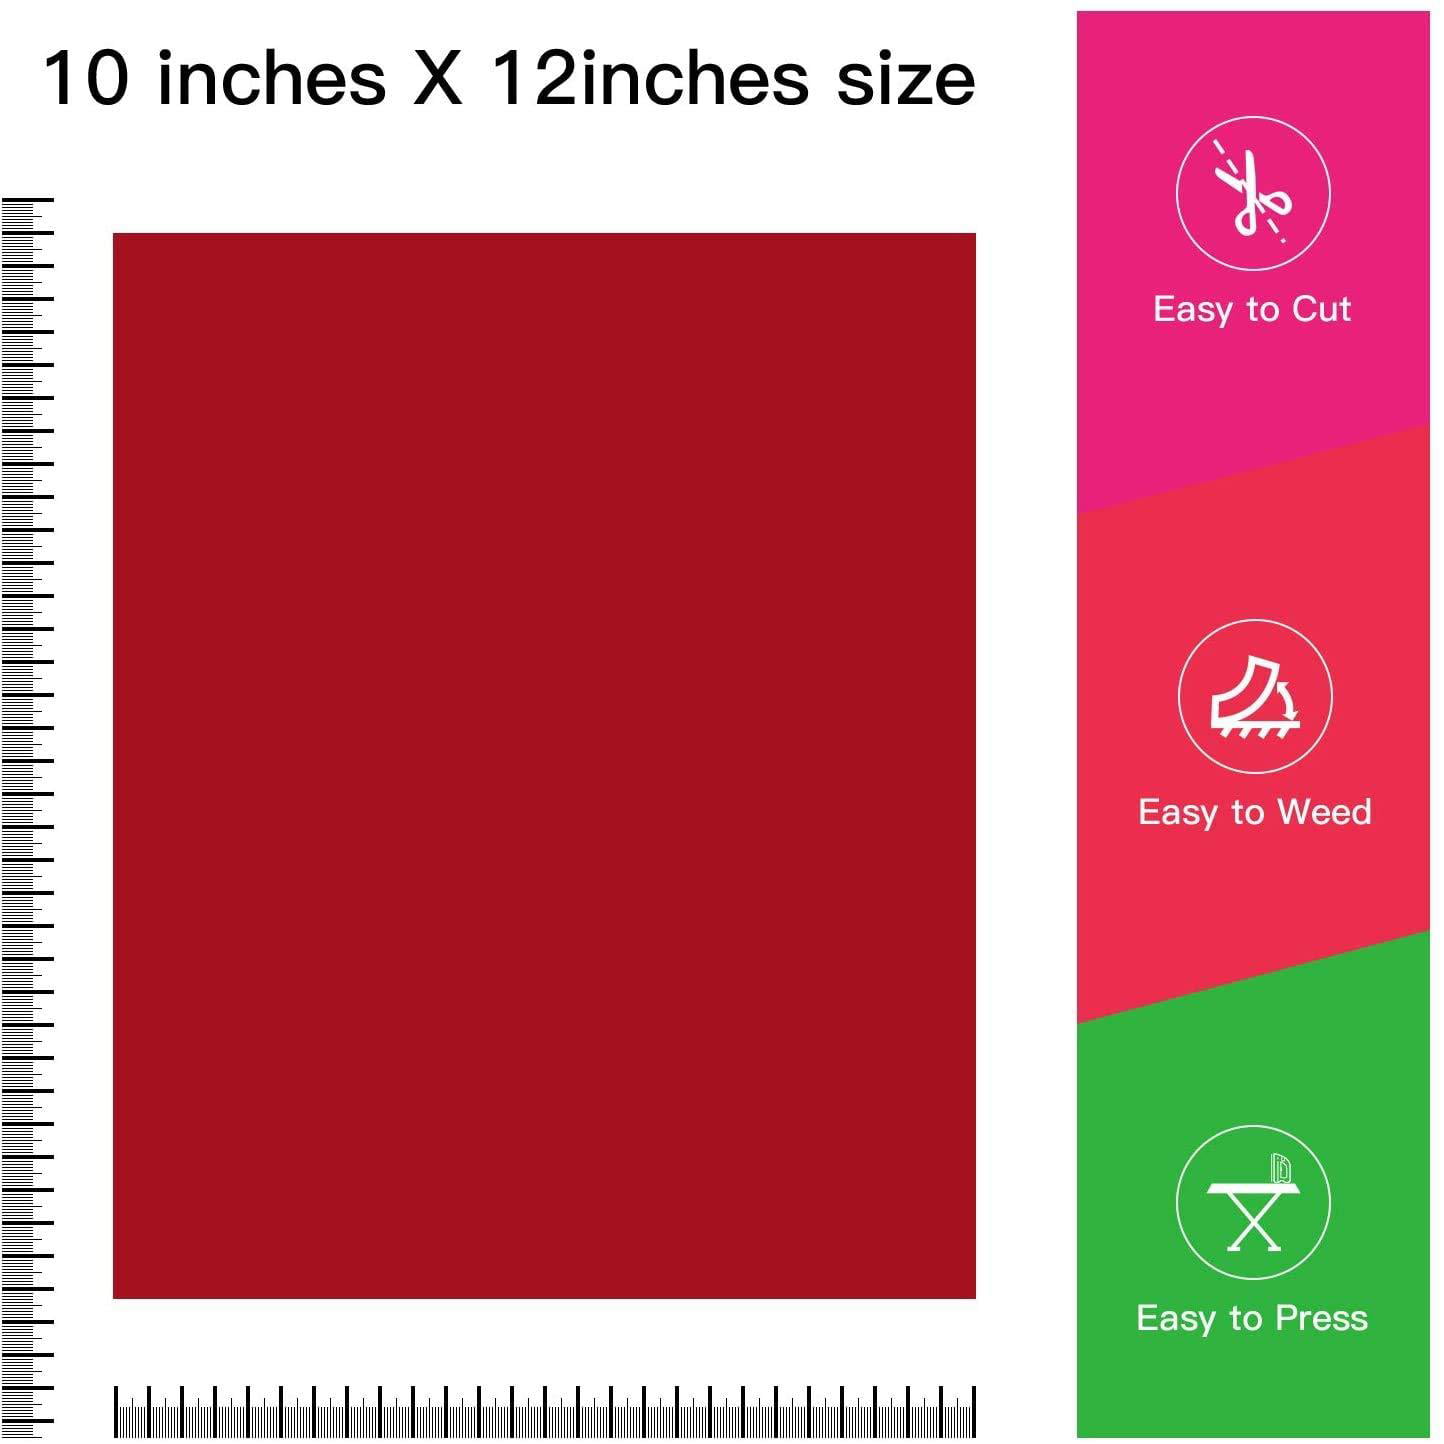 Iron On Vinyl for Cricut and Silhouette Many Kind of Colors Included Heat Transfer Vinyl Bundle 10 Inch x 10 Feet Each for DIY T-Shirts HTV Vinyl Bundle 